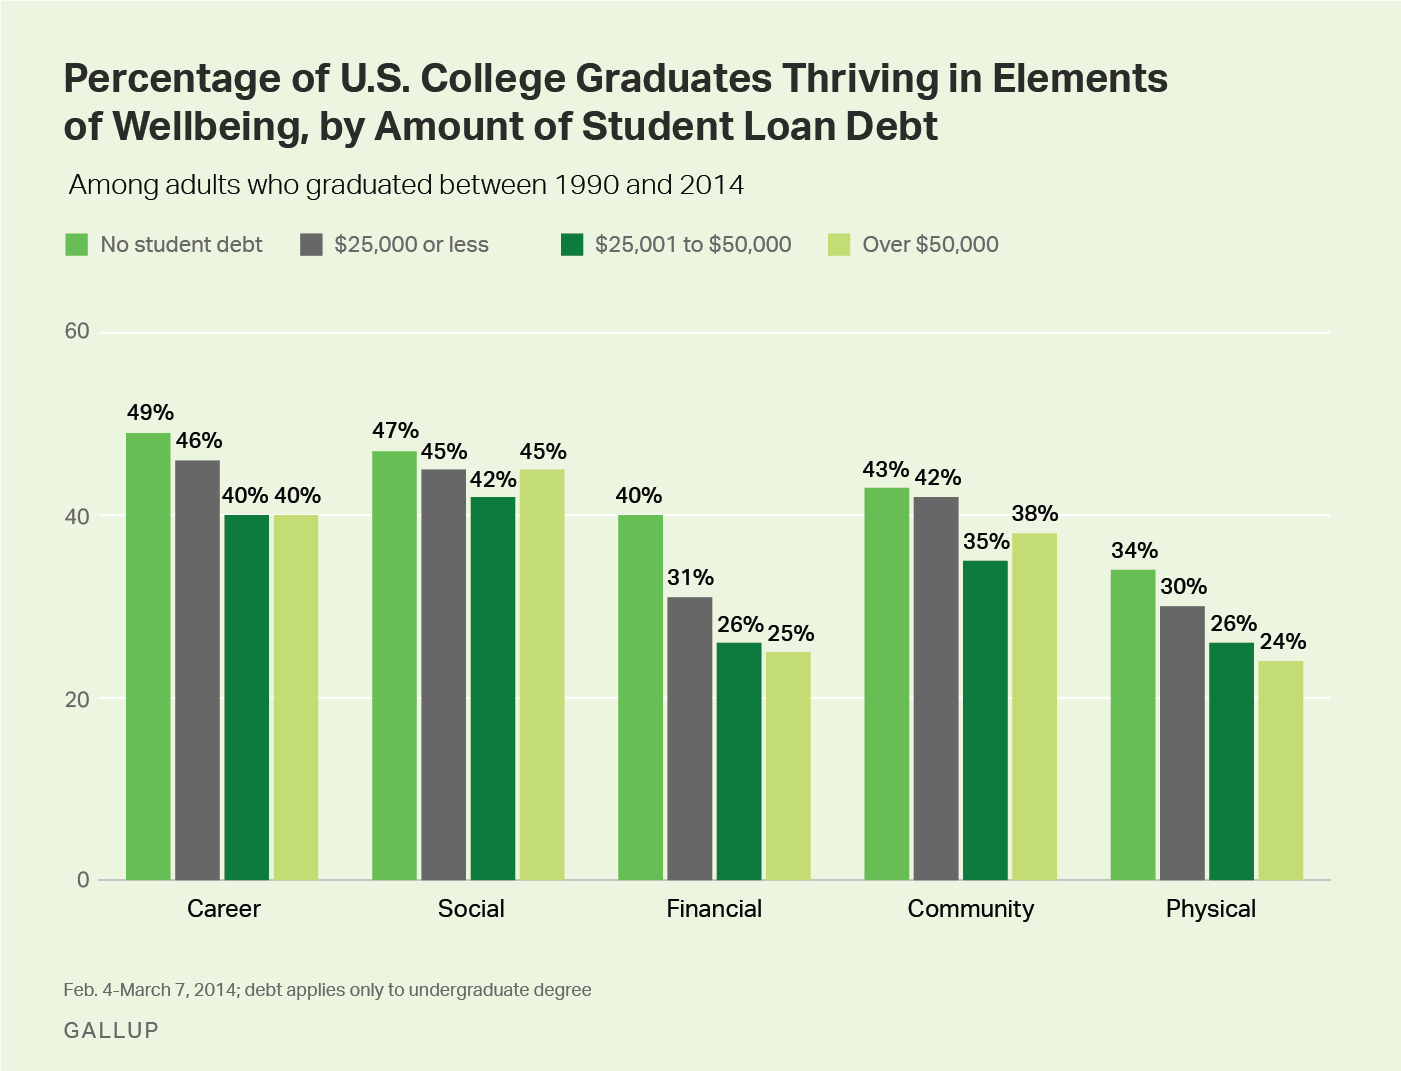 Percentage of graduates thriving in wellbeing, by student loan debt.